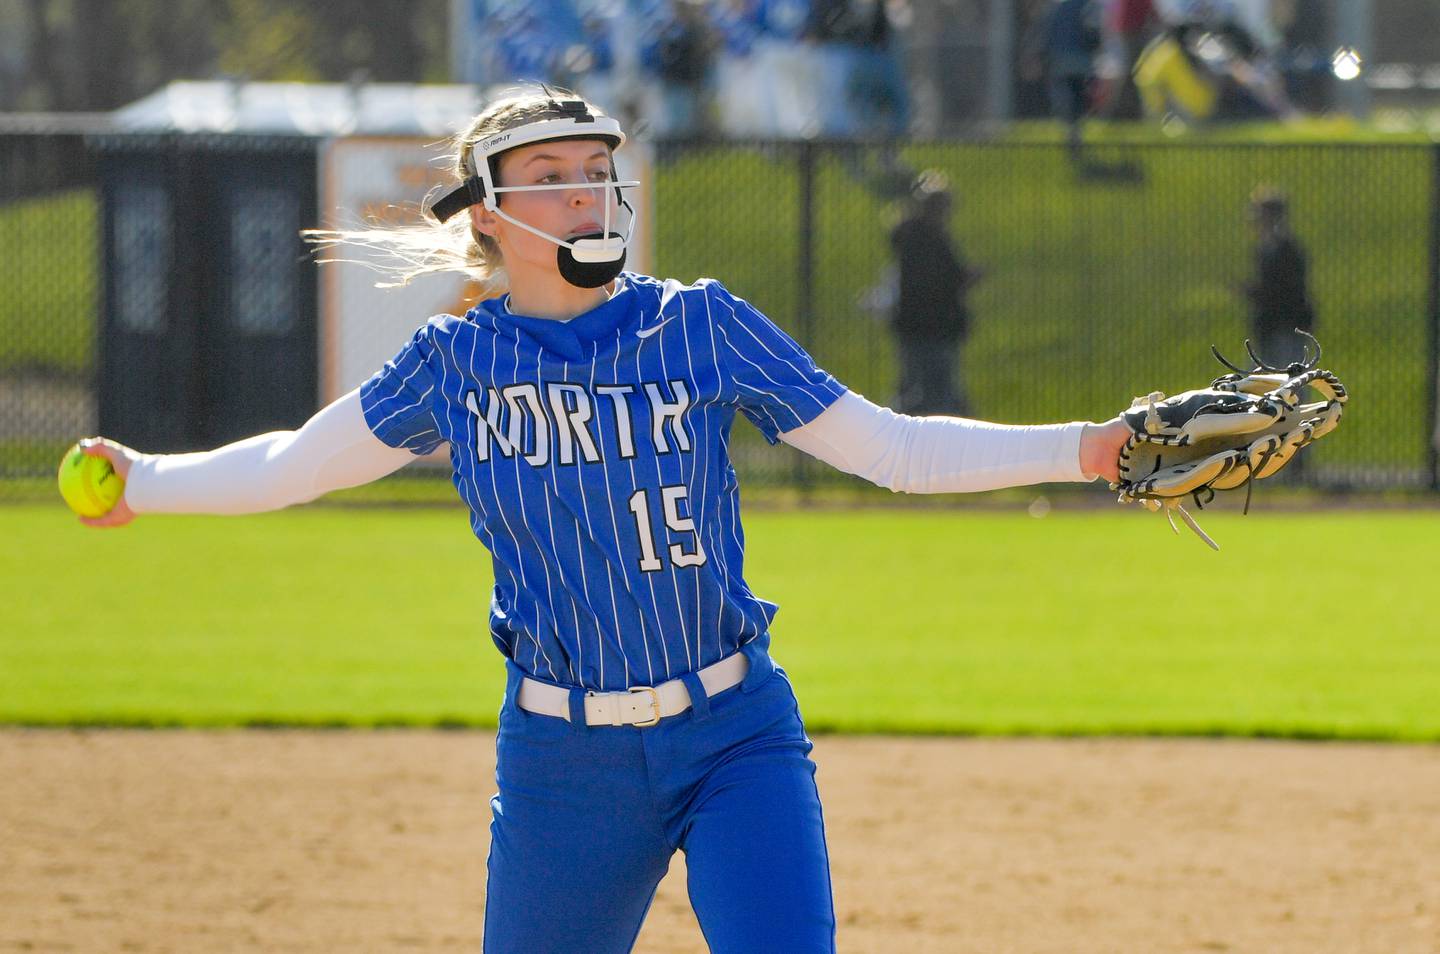 St. Charles North's Paige Murray (15) pitches against Lake Park in St. Charles during a game on Friday, April 21, 2023.